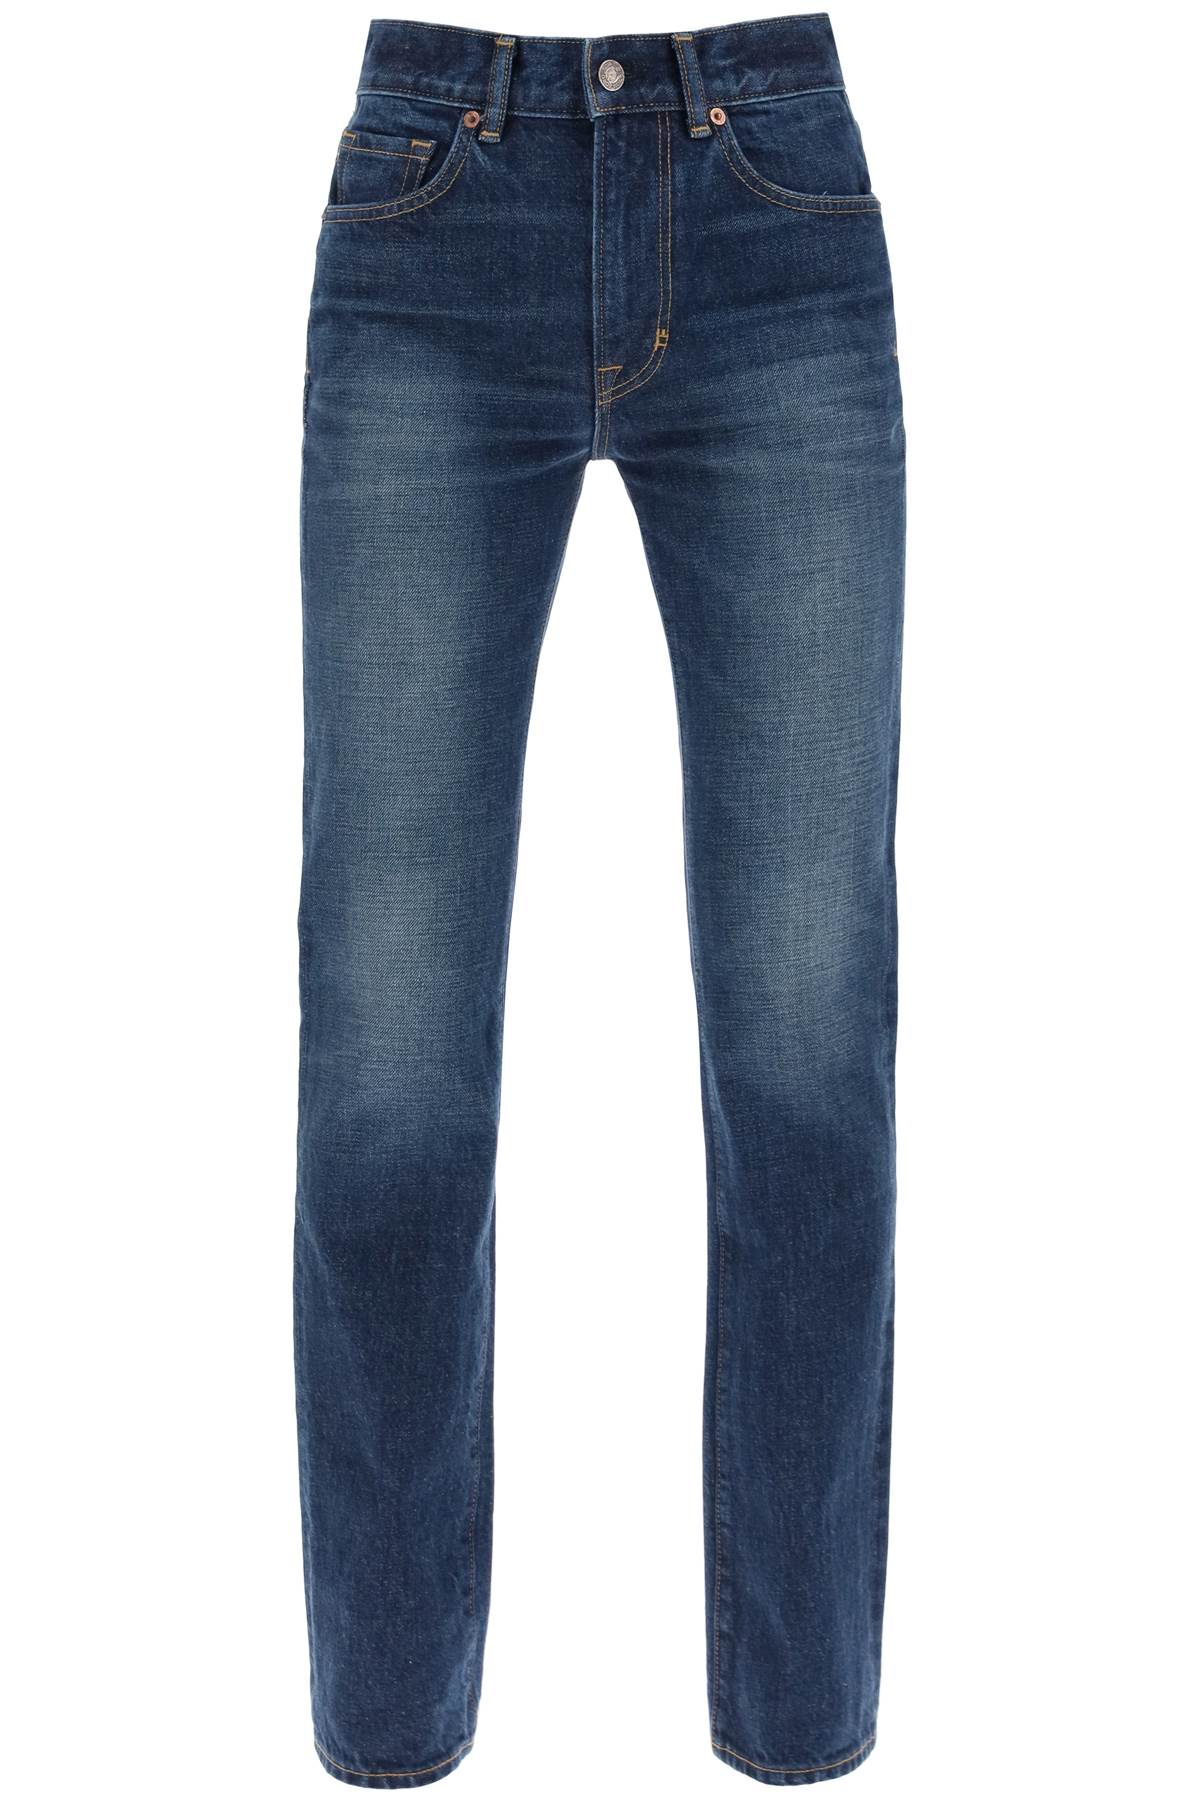 Tom ford "jeans with stone wash treatment-0